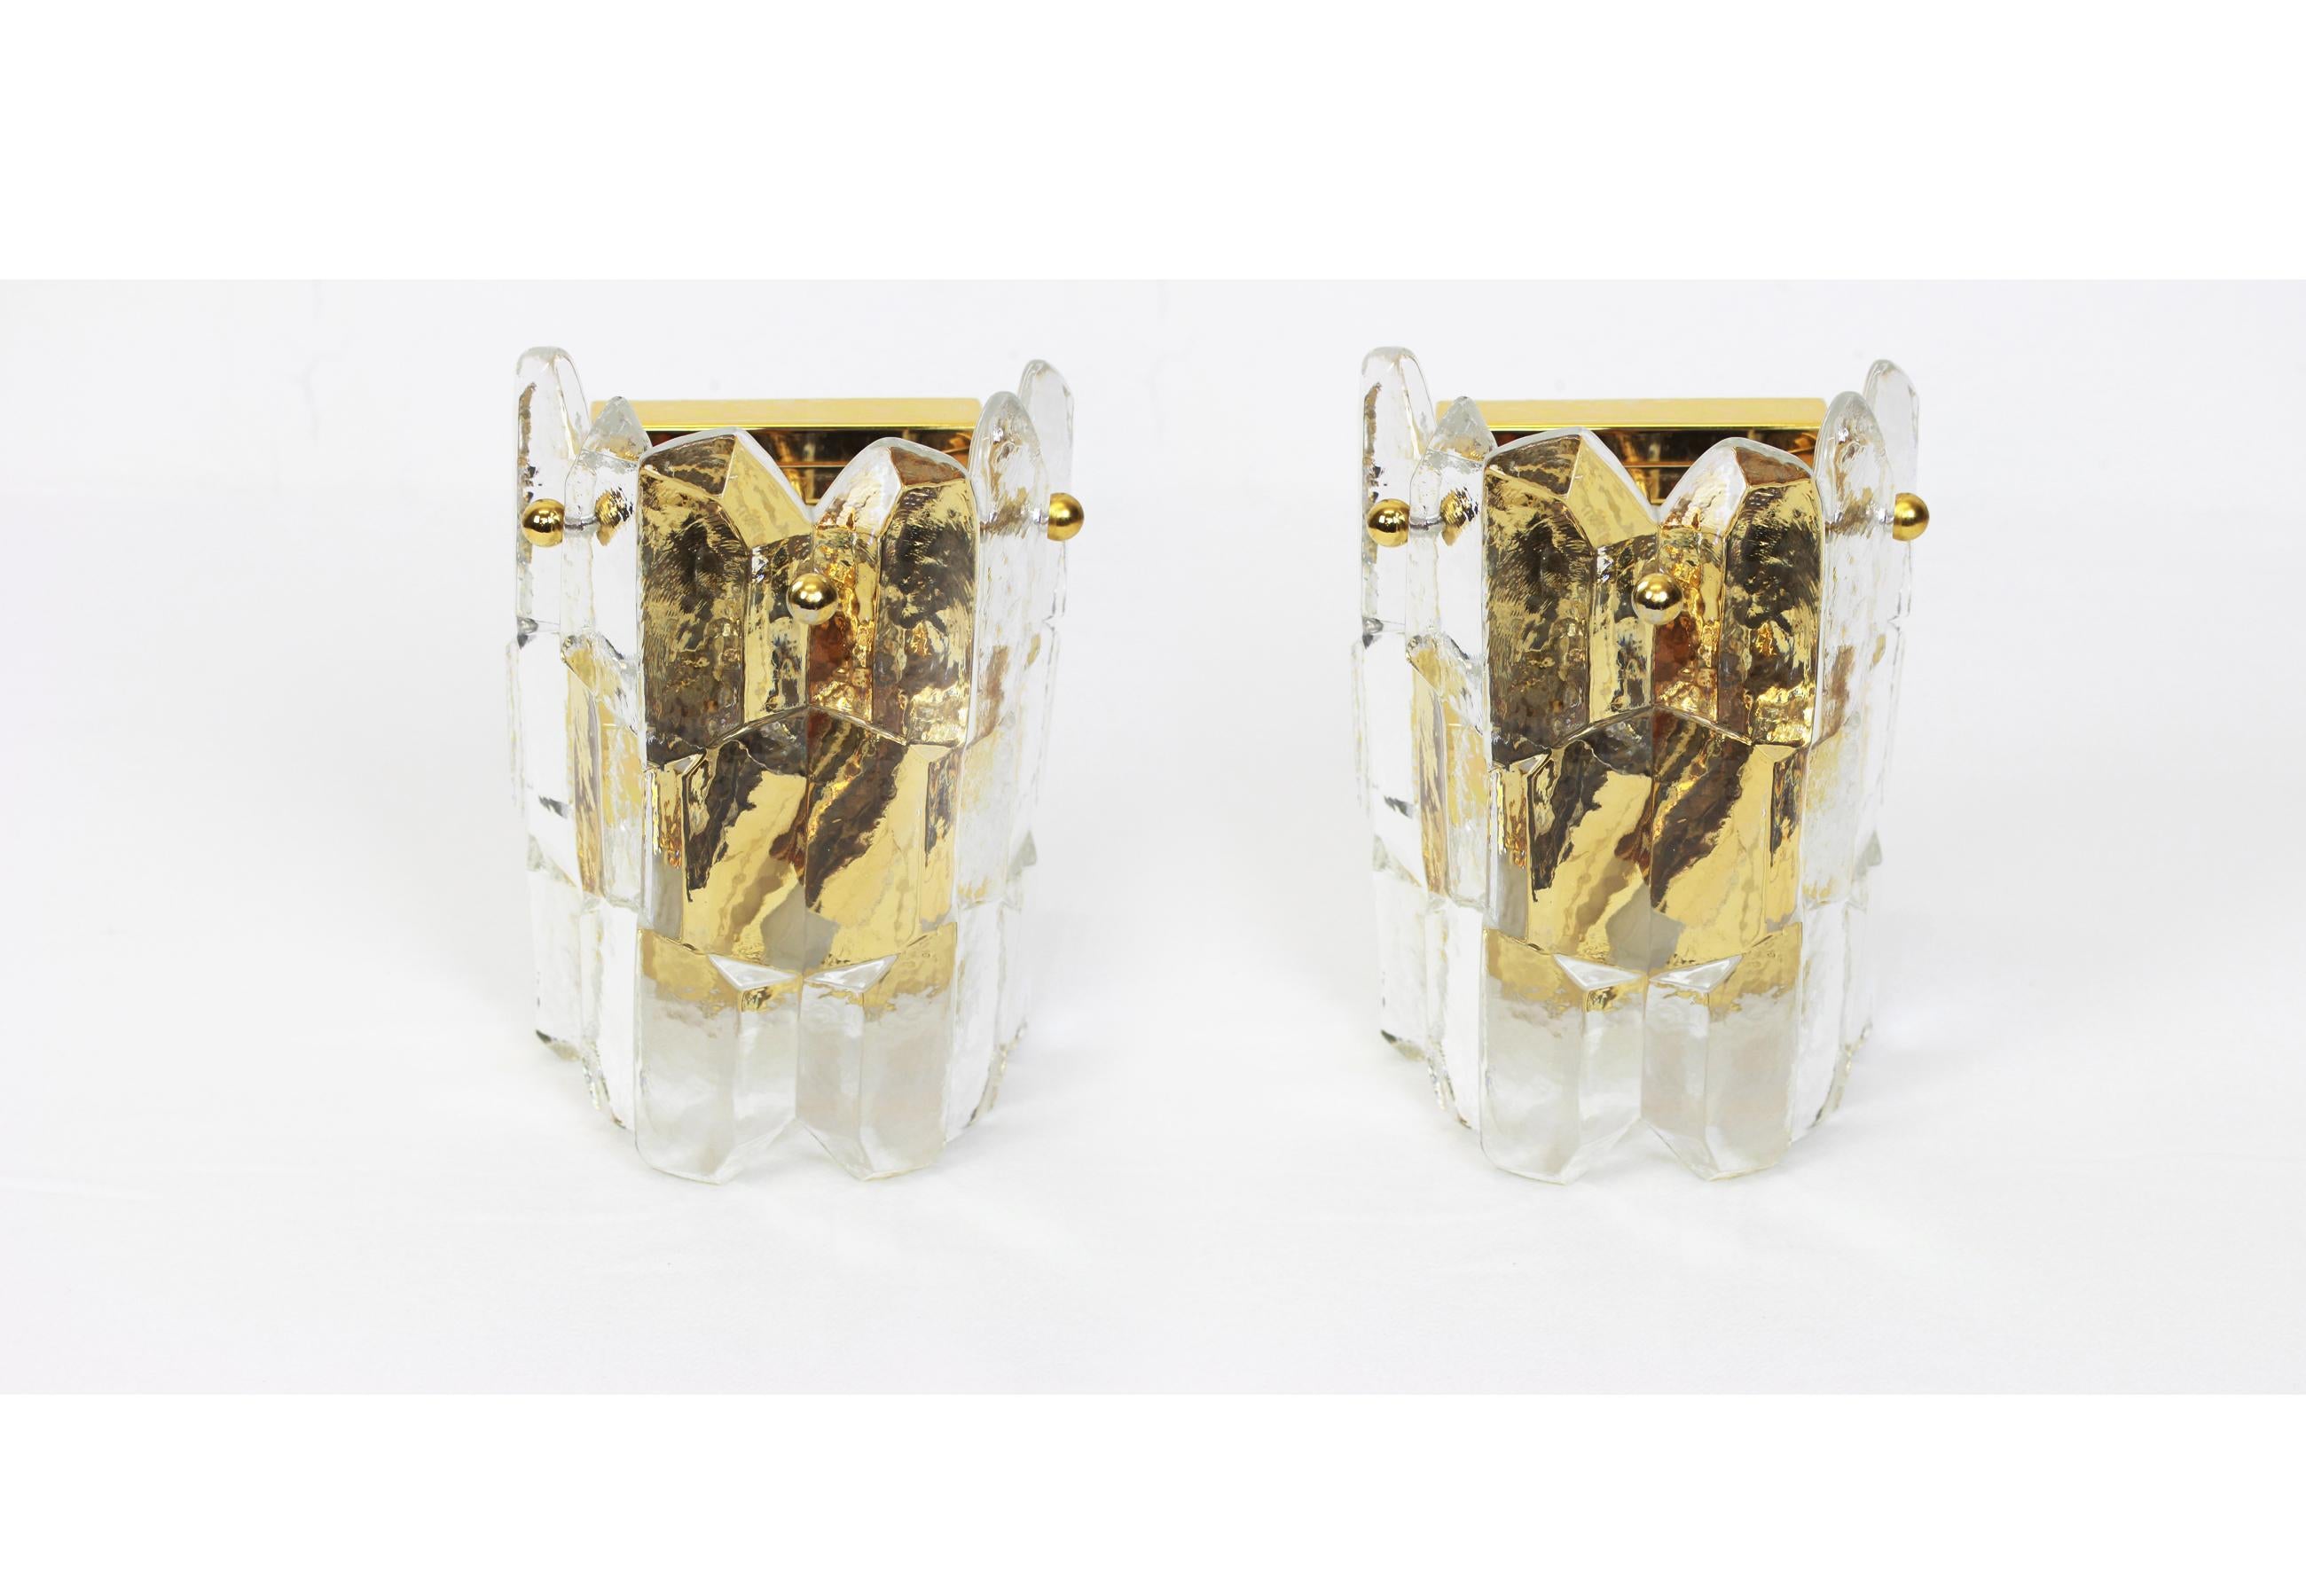 1 of 3 Sets of Kalmar Gilded Sconces Murano Wall Lights Palazzo, Austria, 1970s For Sale 1